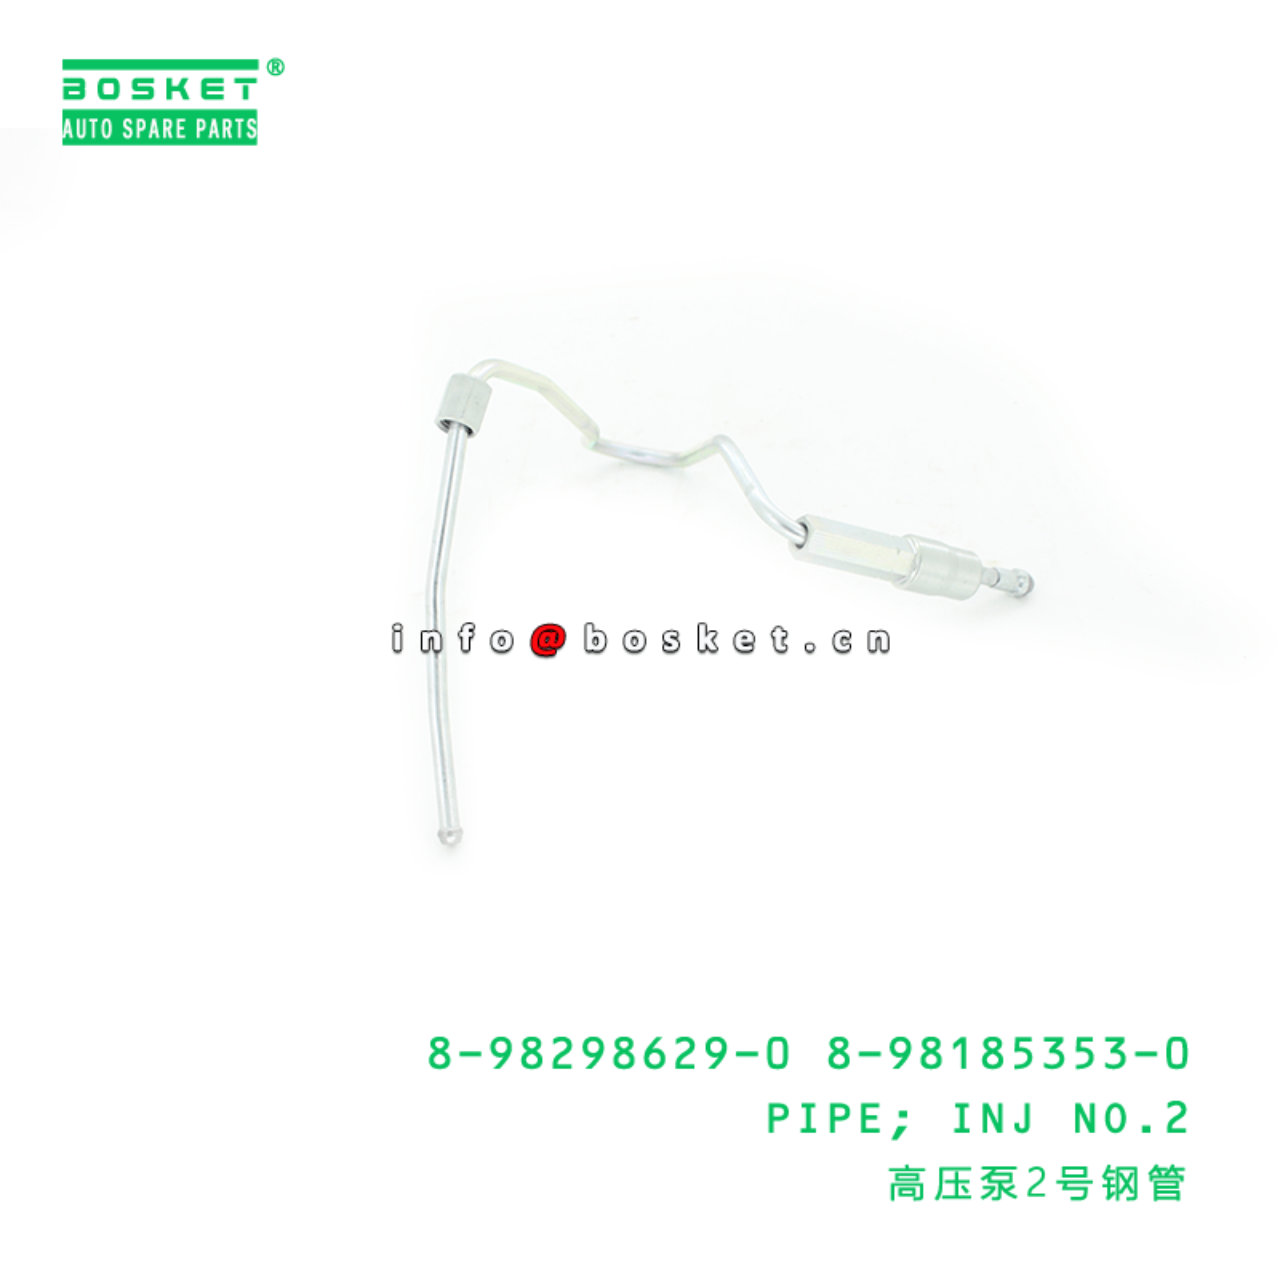 8-98298629-0 8-98185353-0 Injection No.2 Pipe 8982986290 8981853530 Suitable for ISUZU NPR75 4HK1T